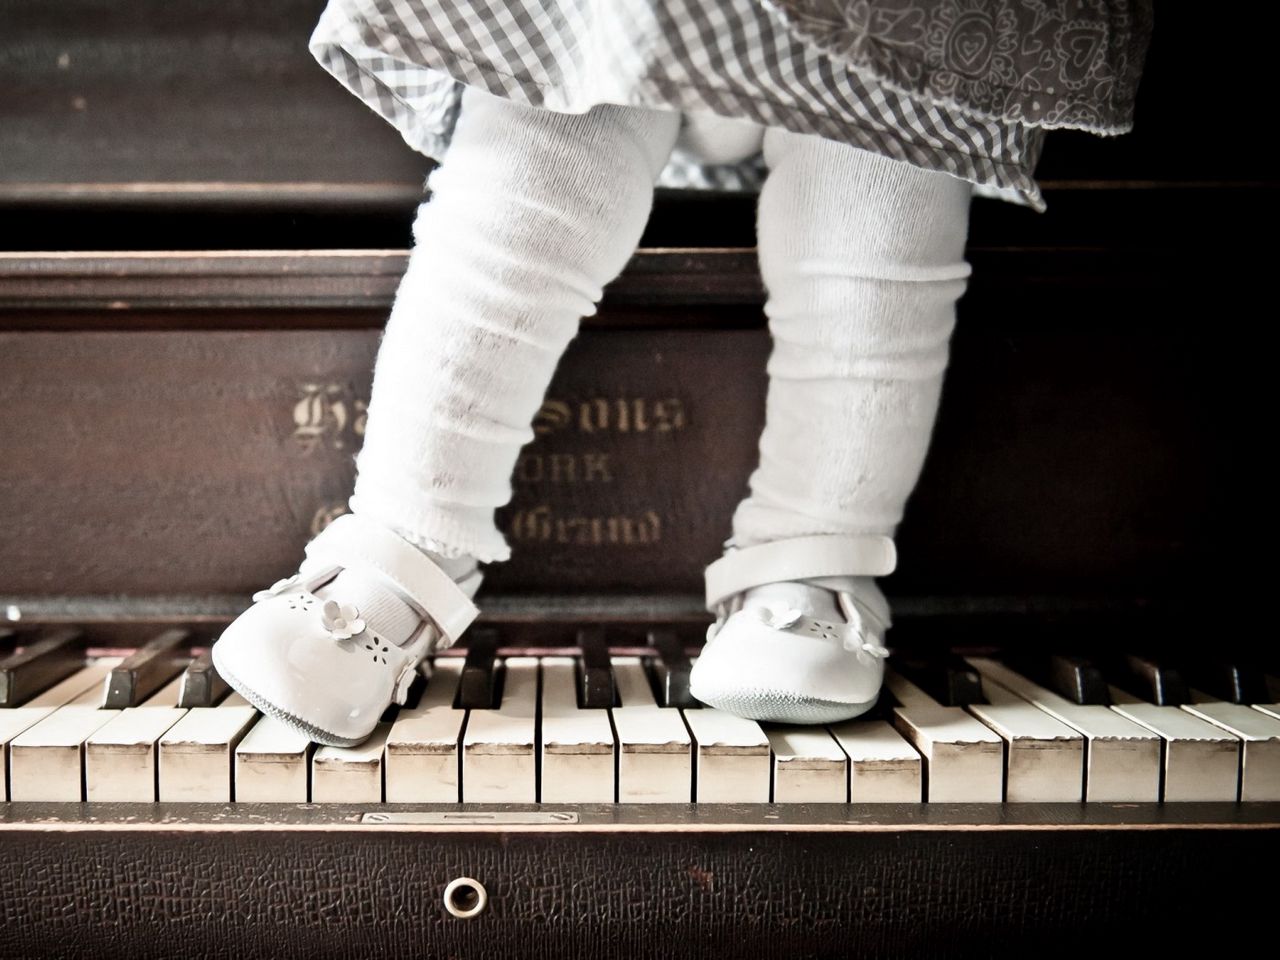 Download wallpaper 1280x960 piano, girl, background standard 4:3 hd  background